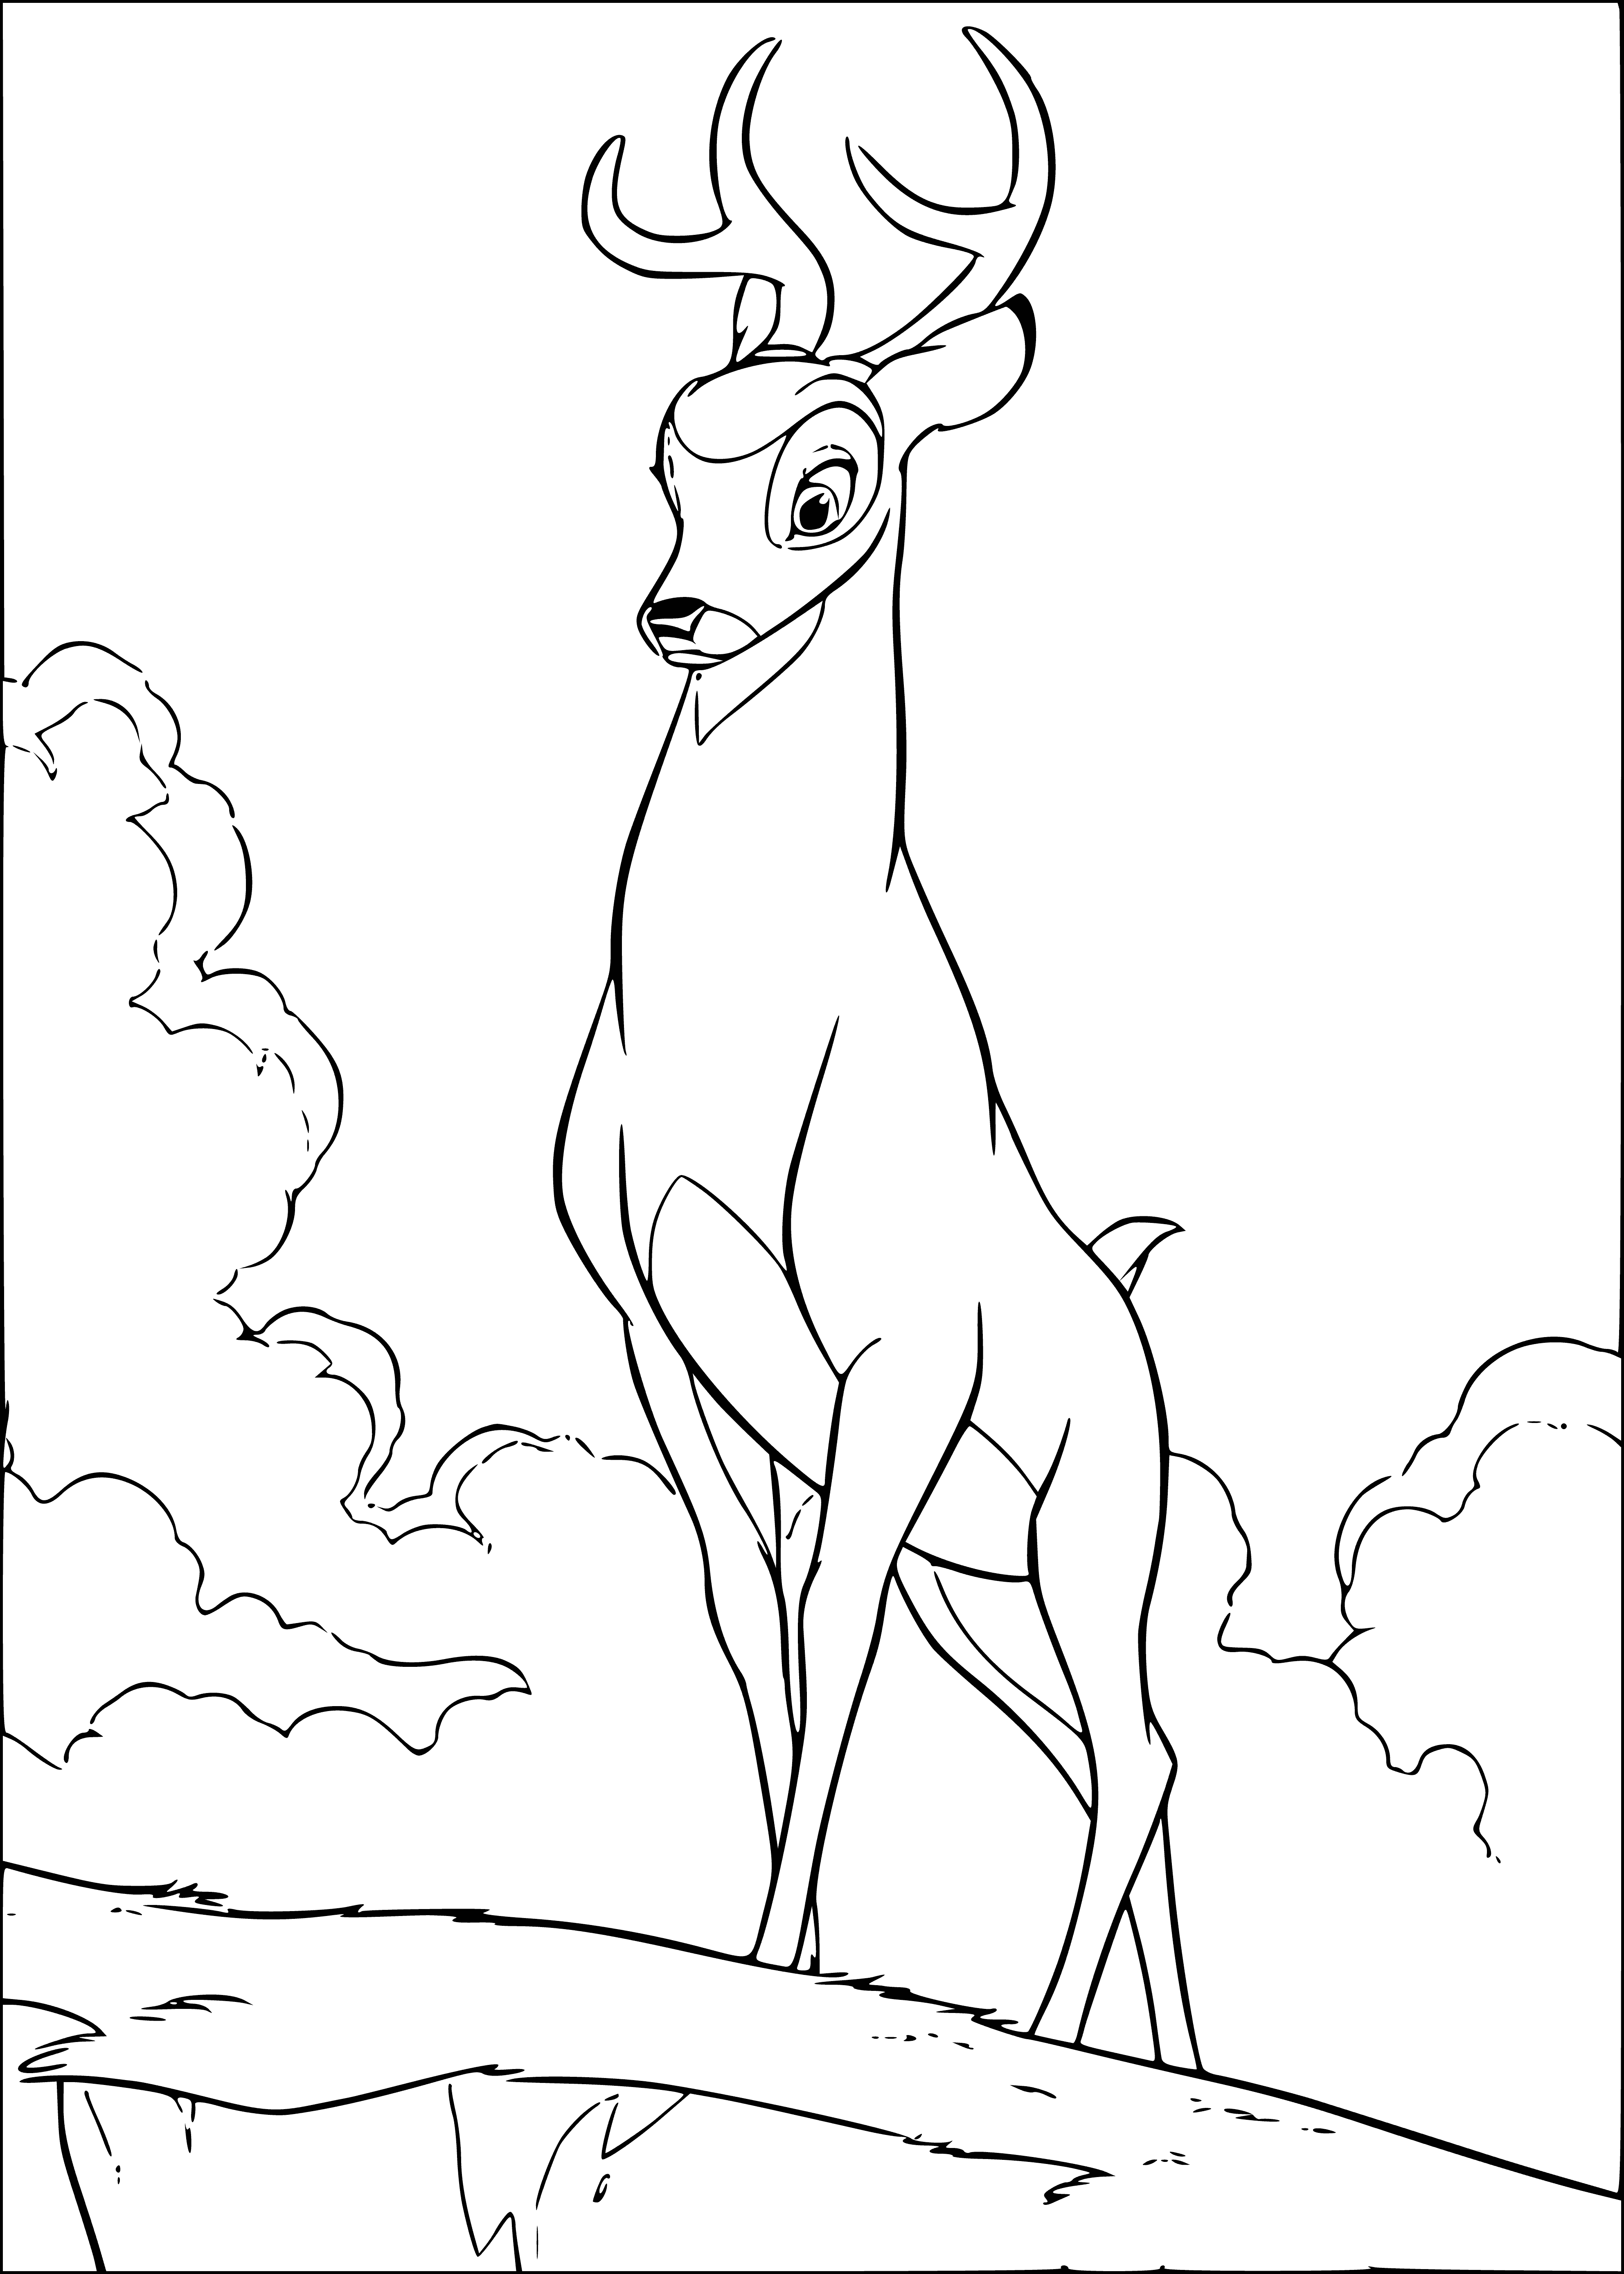 coloring page: Bambi is a small, brown deer with big ears, a white tail, and is standing in the forest looking at something.